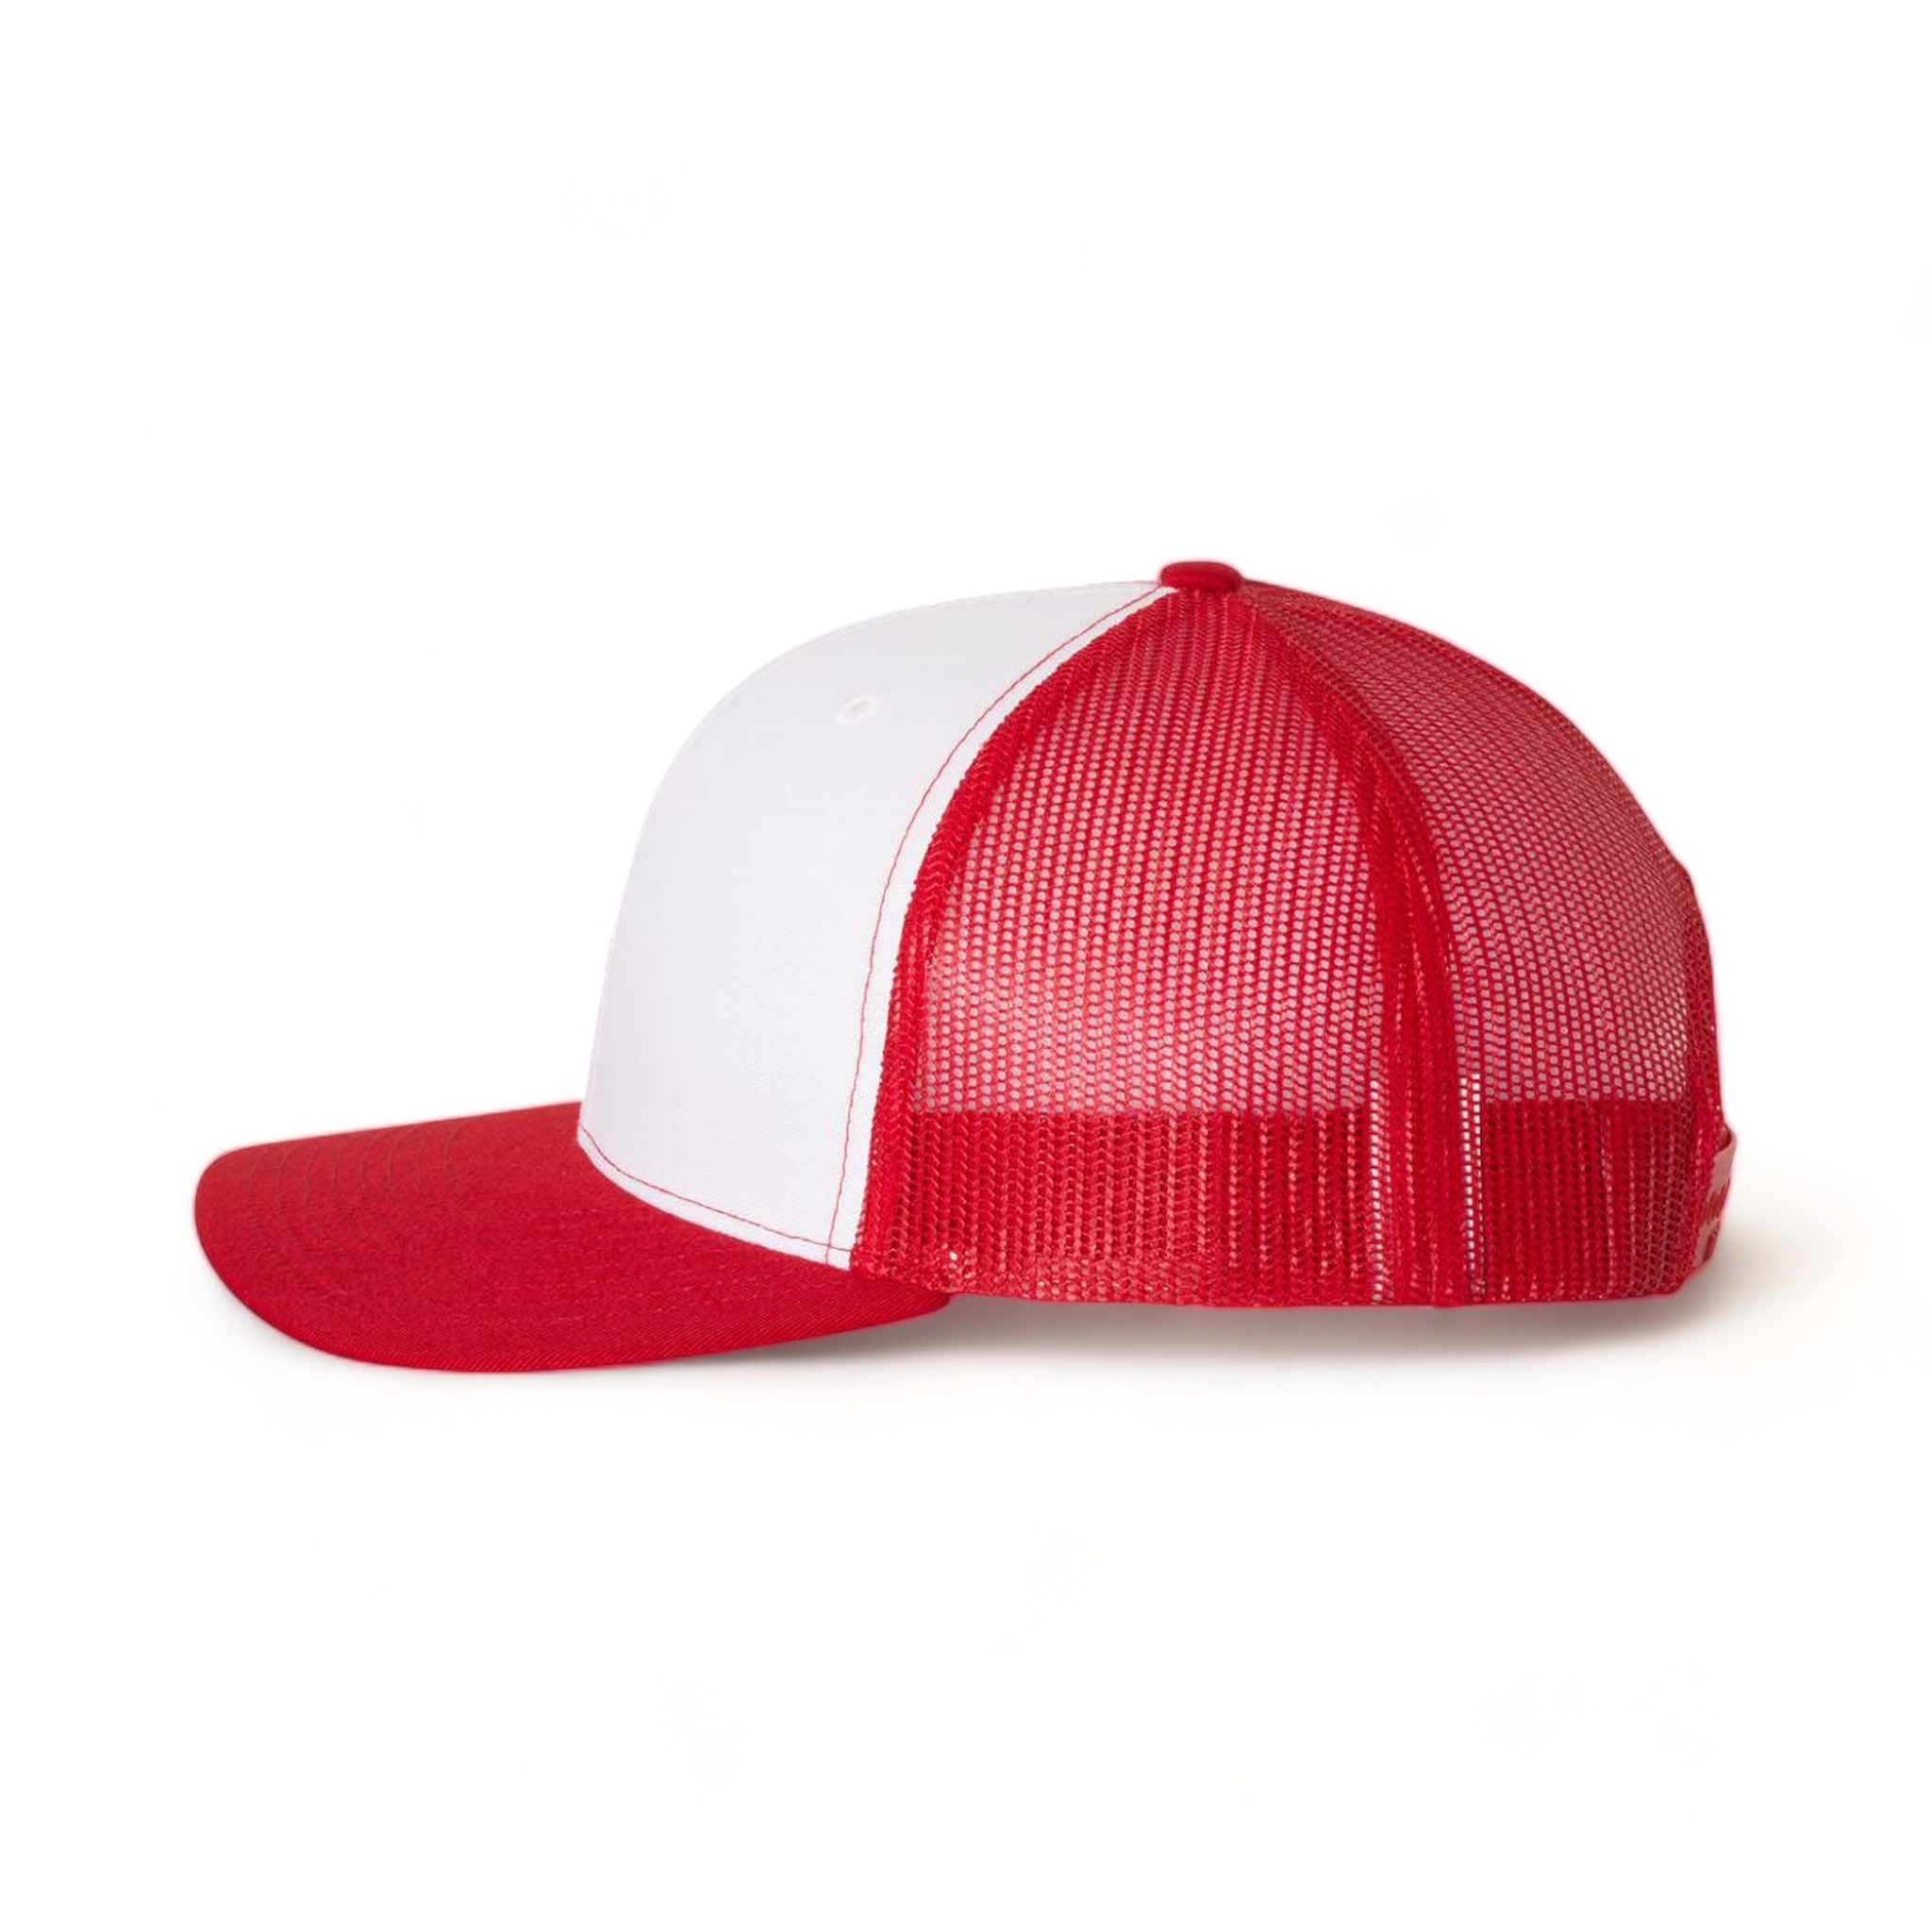 Side view of Richardson 112 custom hat in white and red